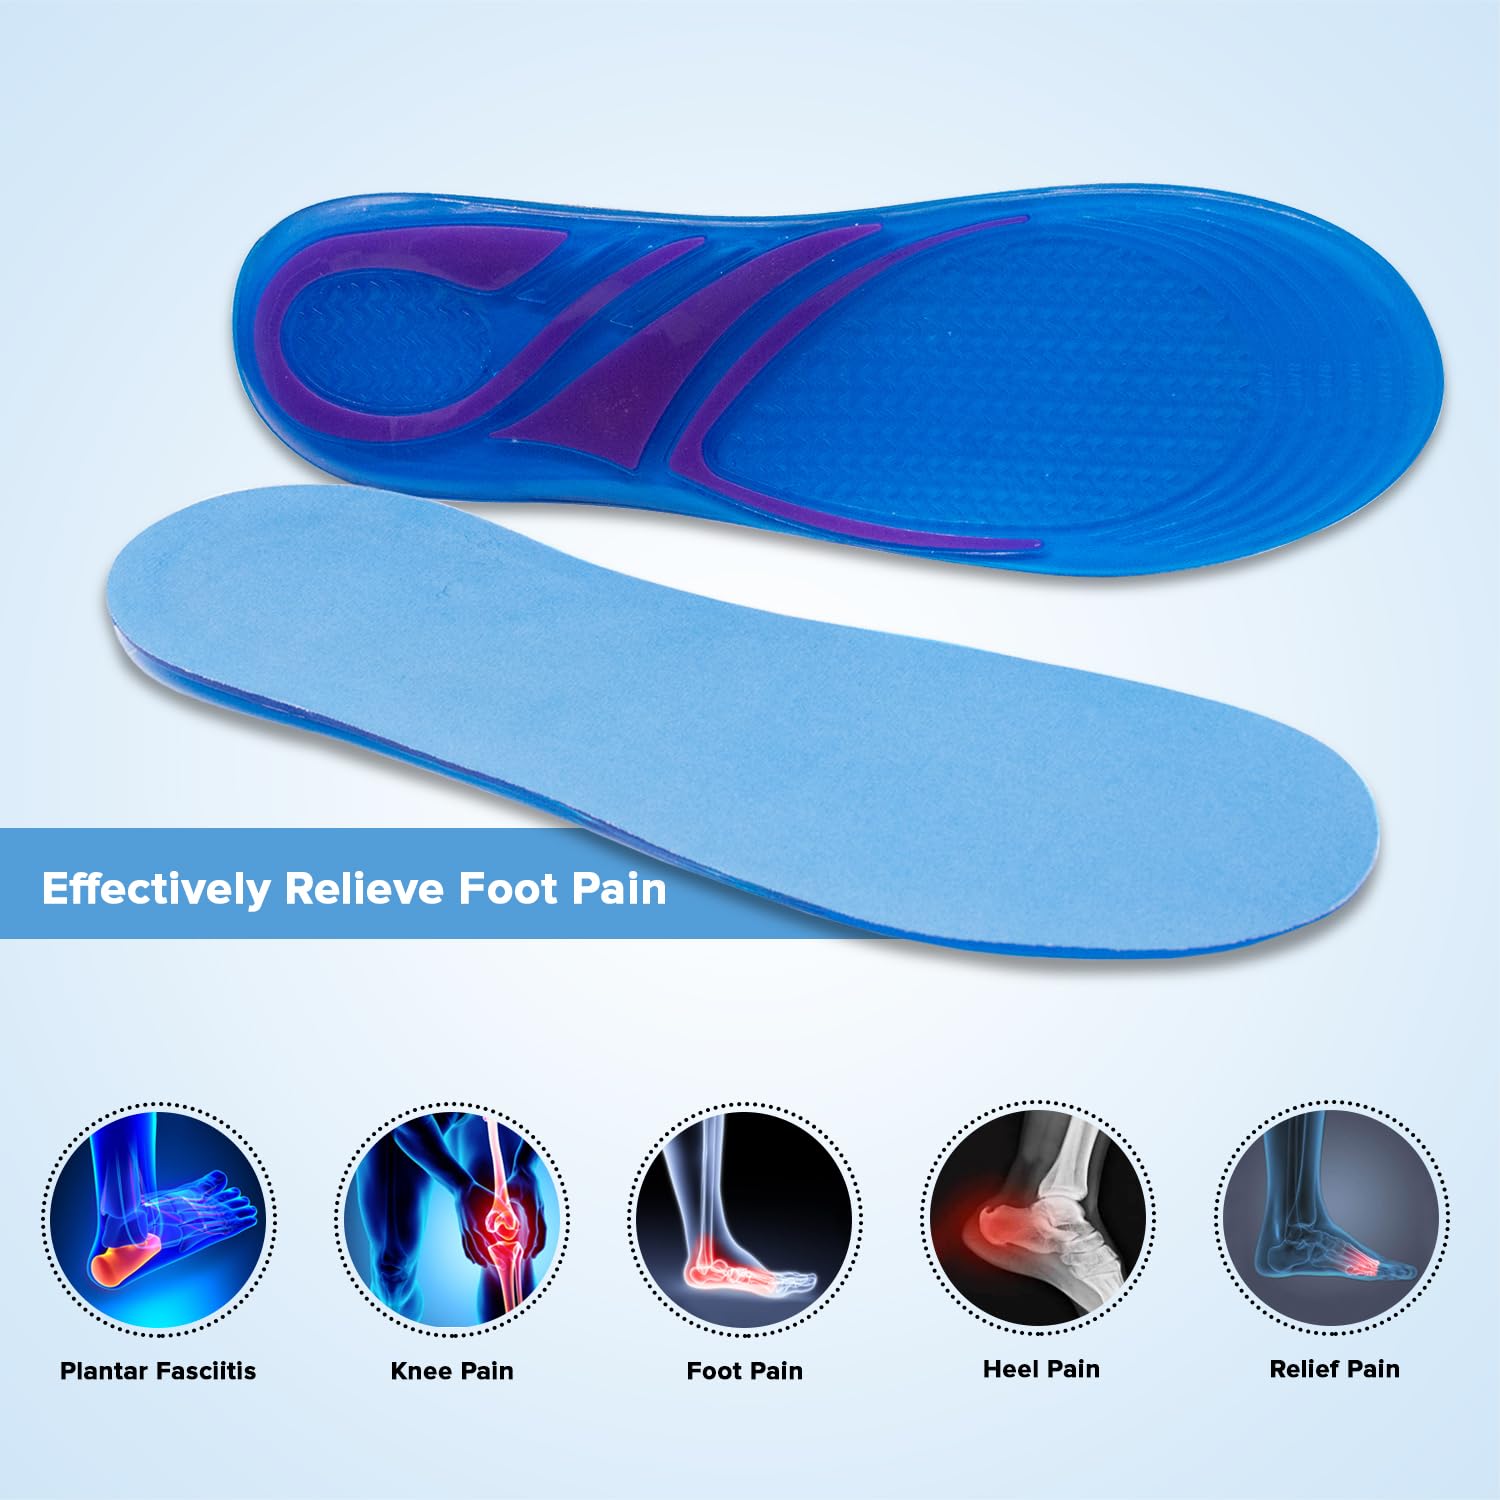 Dr Foot Massaging Gel Ultra Thin Insoles |Thin and Comfortable Inserts for Enhanced Foot Massage |For Walking, Running | For Men & Women - 1 Pair (Small Size)